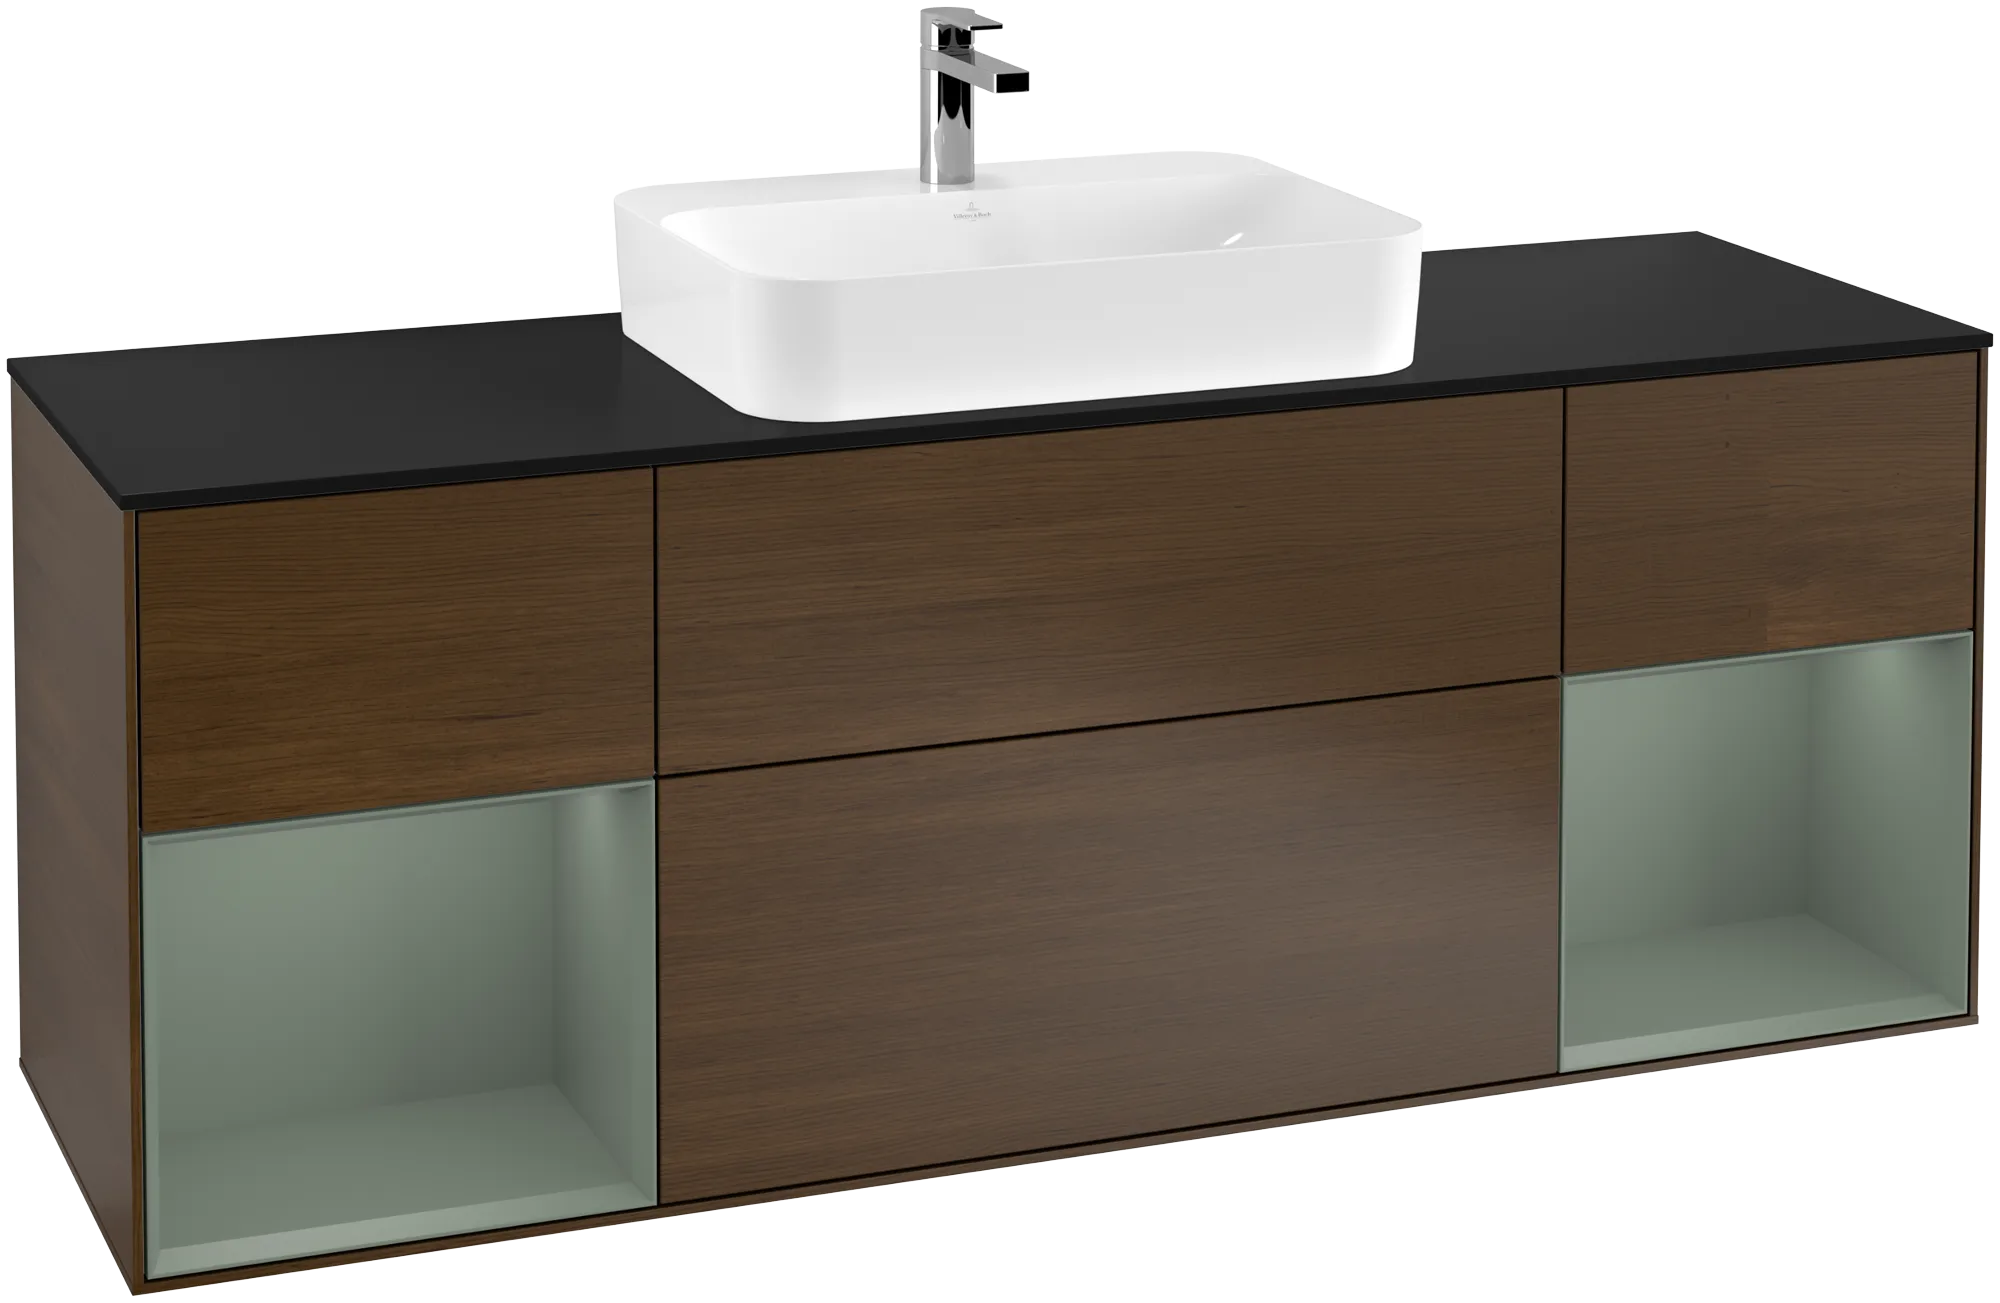 Picture of VILLEROY BOCH Finion Vanity unit, with lighting, 4 pull-out compartments, 1600 x 603 x 501 mm, Walnut Veneer / Olive Matt Lacquer / Glass Black Matt #G452GMGN